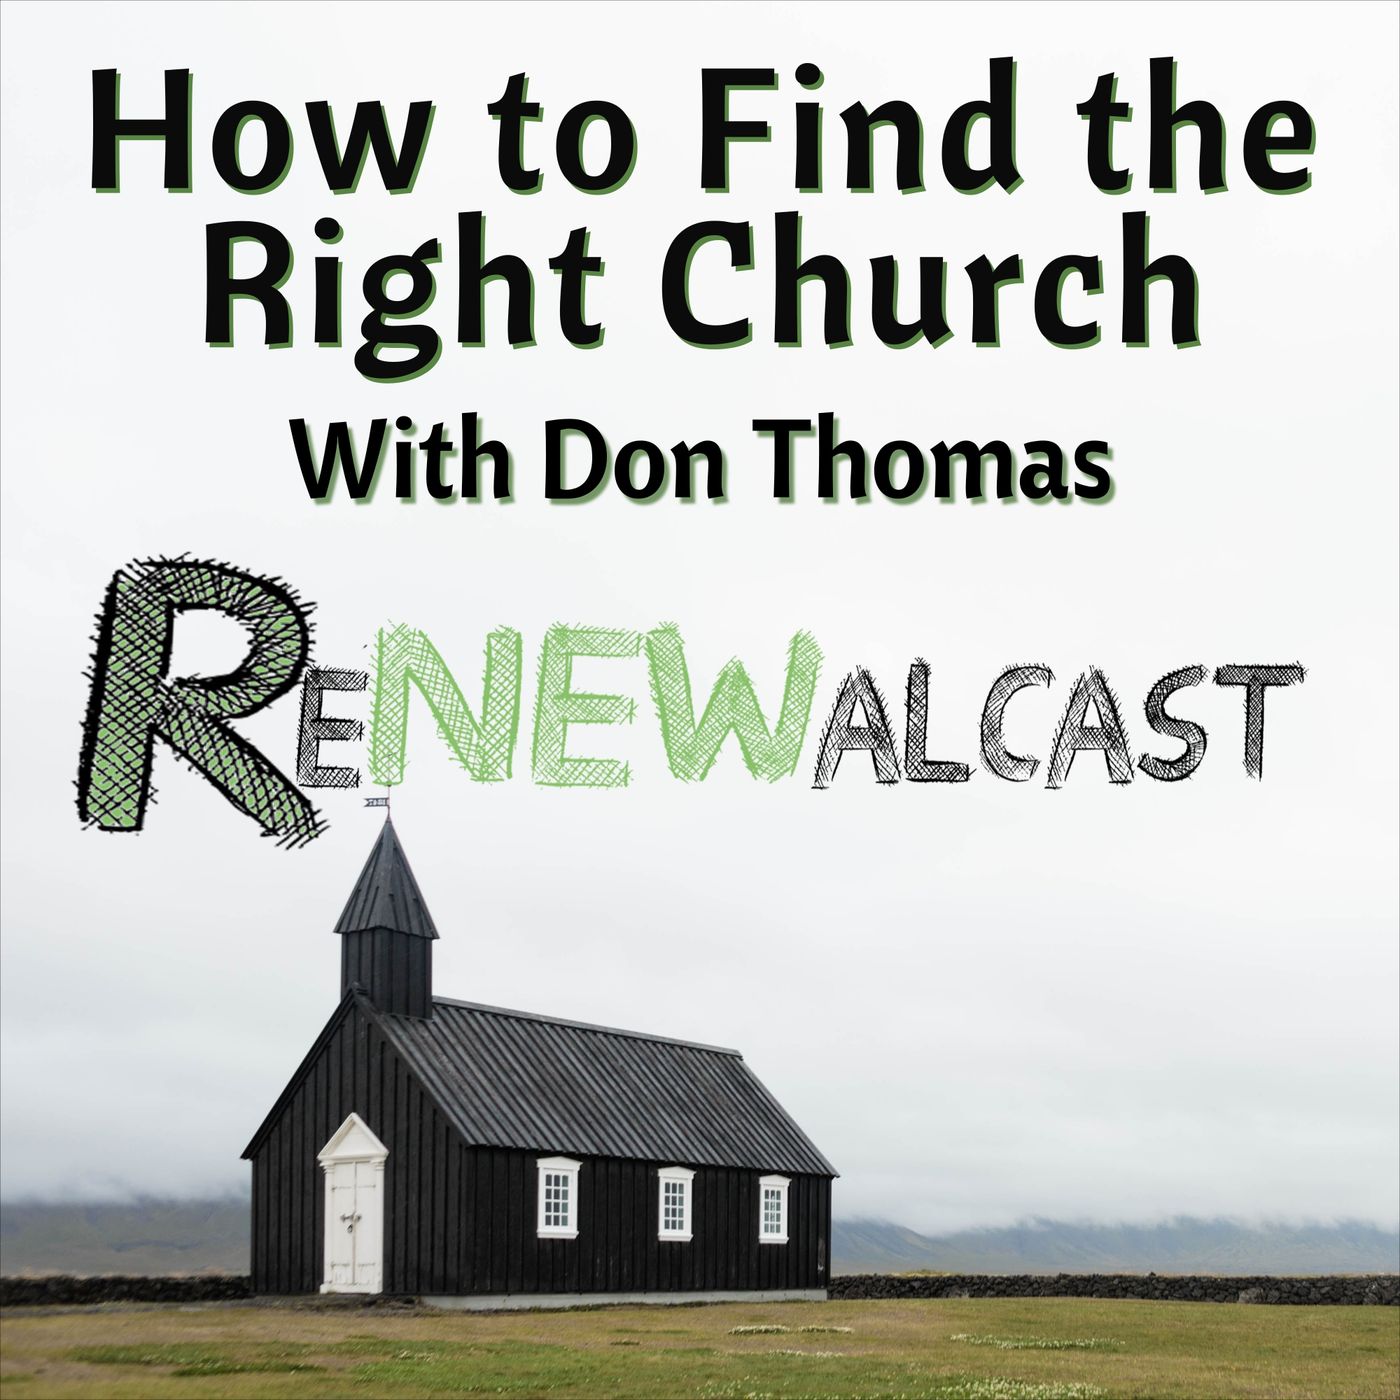 How to Find the Right Church